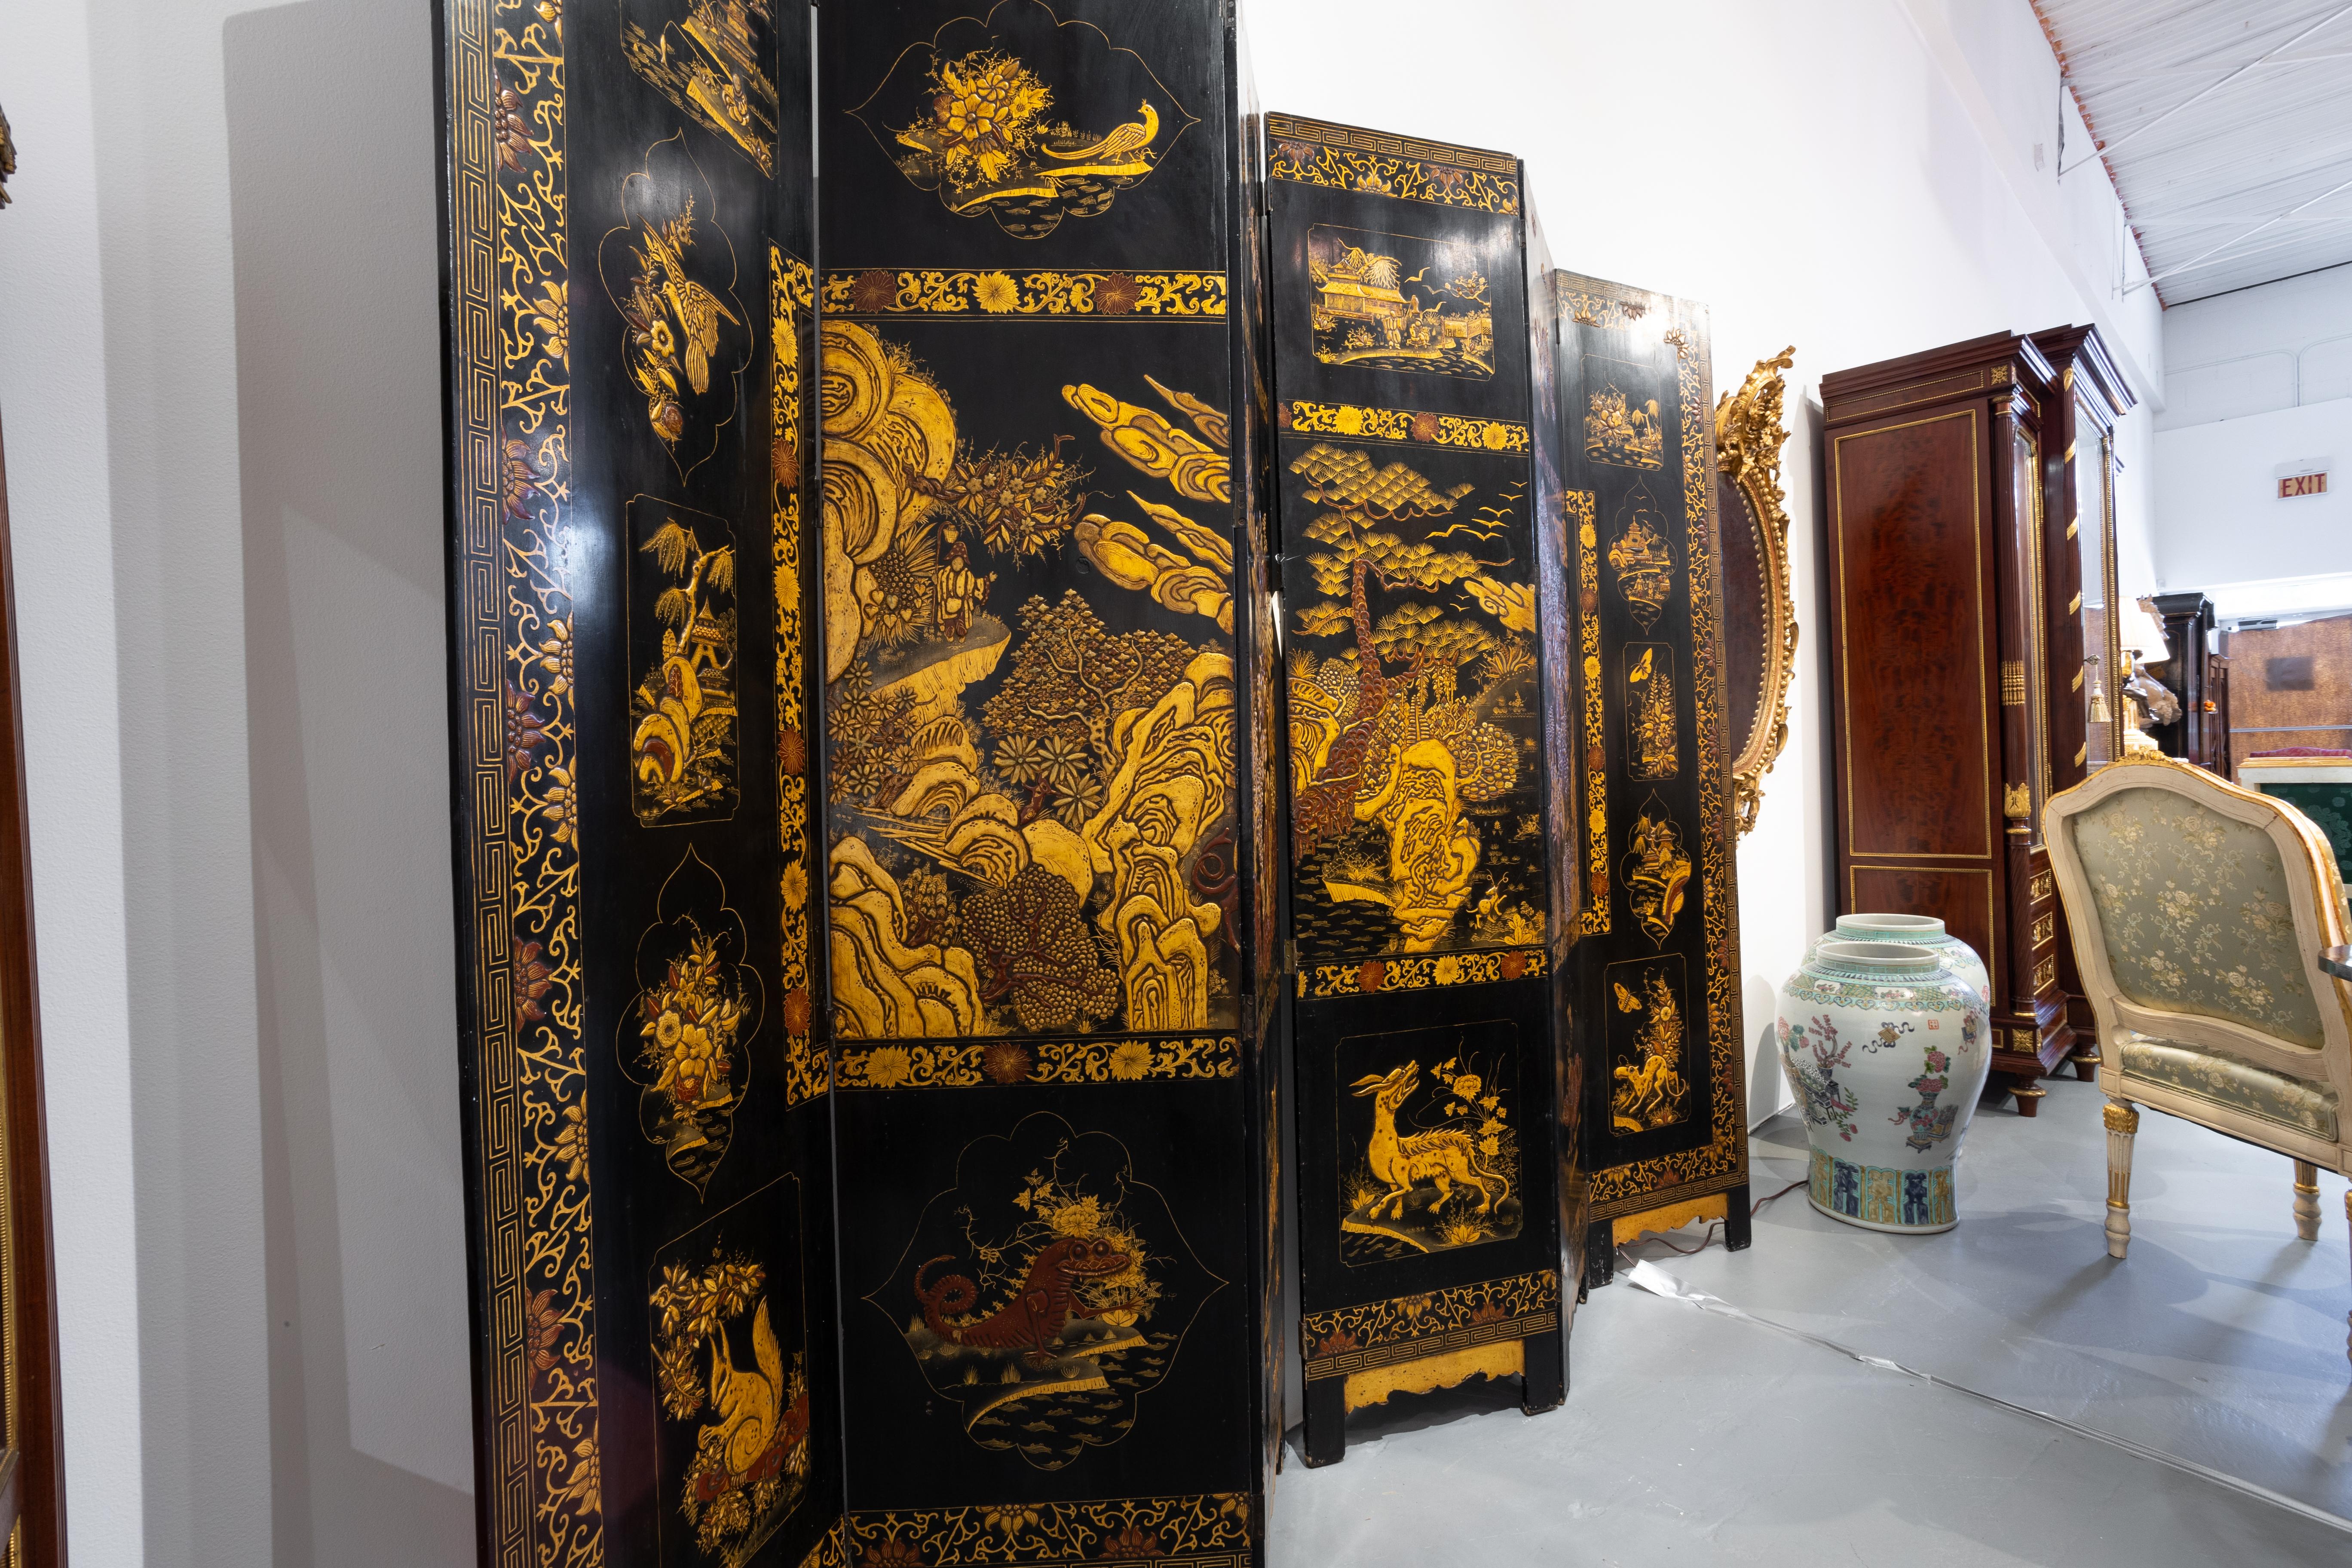 A fine 19th century English black lacquered Chinoiserie decorated 6 panel screen. Greek key design with scenes of figures and animals. Raised detail.